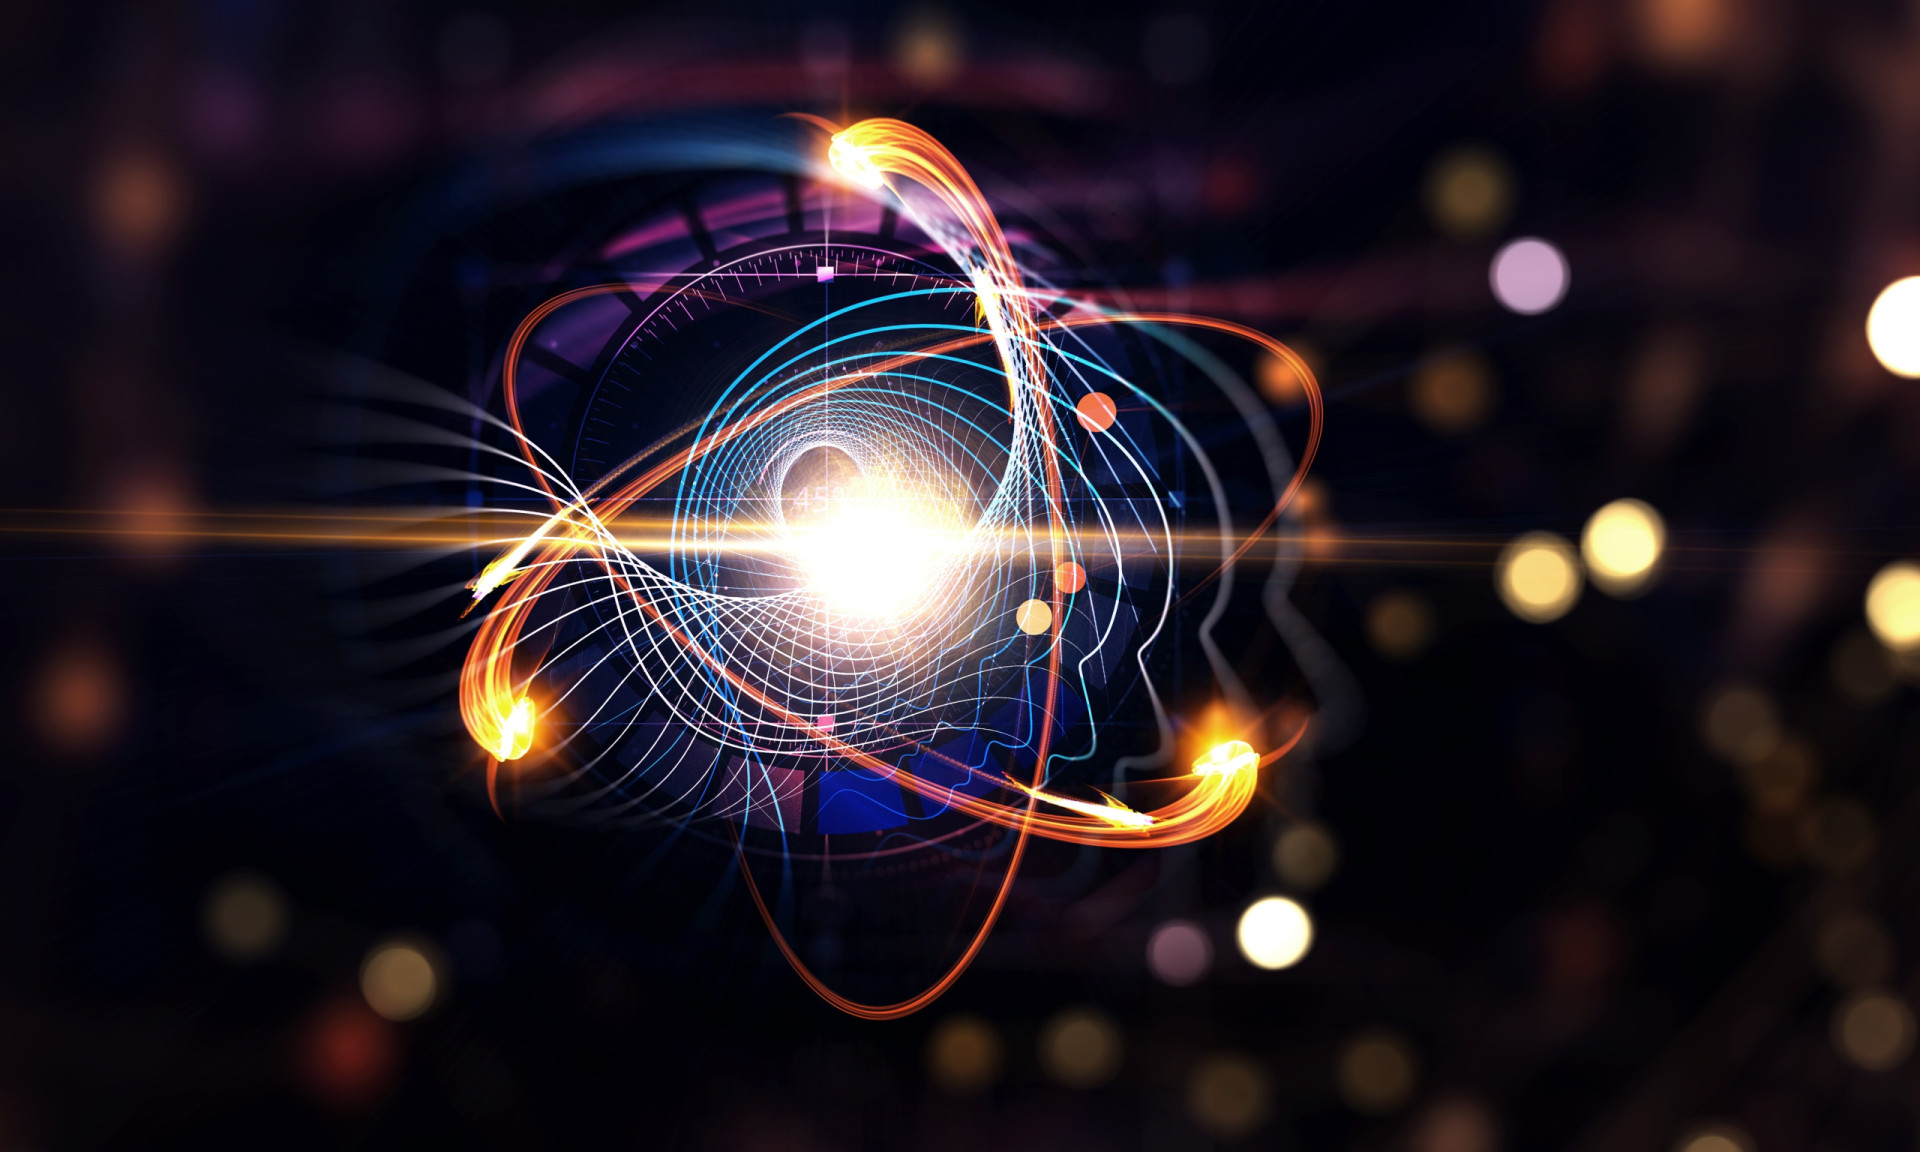 <p>In order to solve the size and gravity problems, a large amount of negative energy would be required inside the atom. The energy of the atom field must have more positive energy overall, however, so even if tiny pockets of negative energy expanded inside, it's not a very realistic proposal.</p>